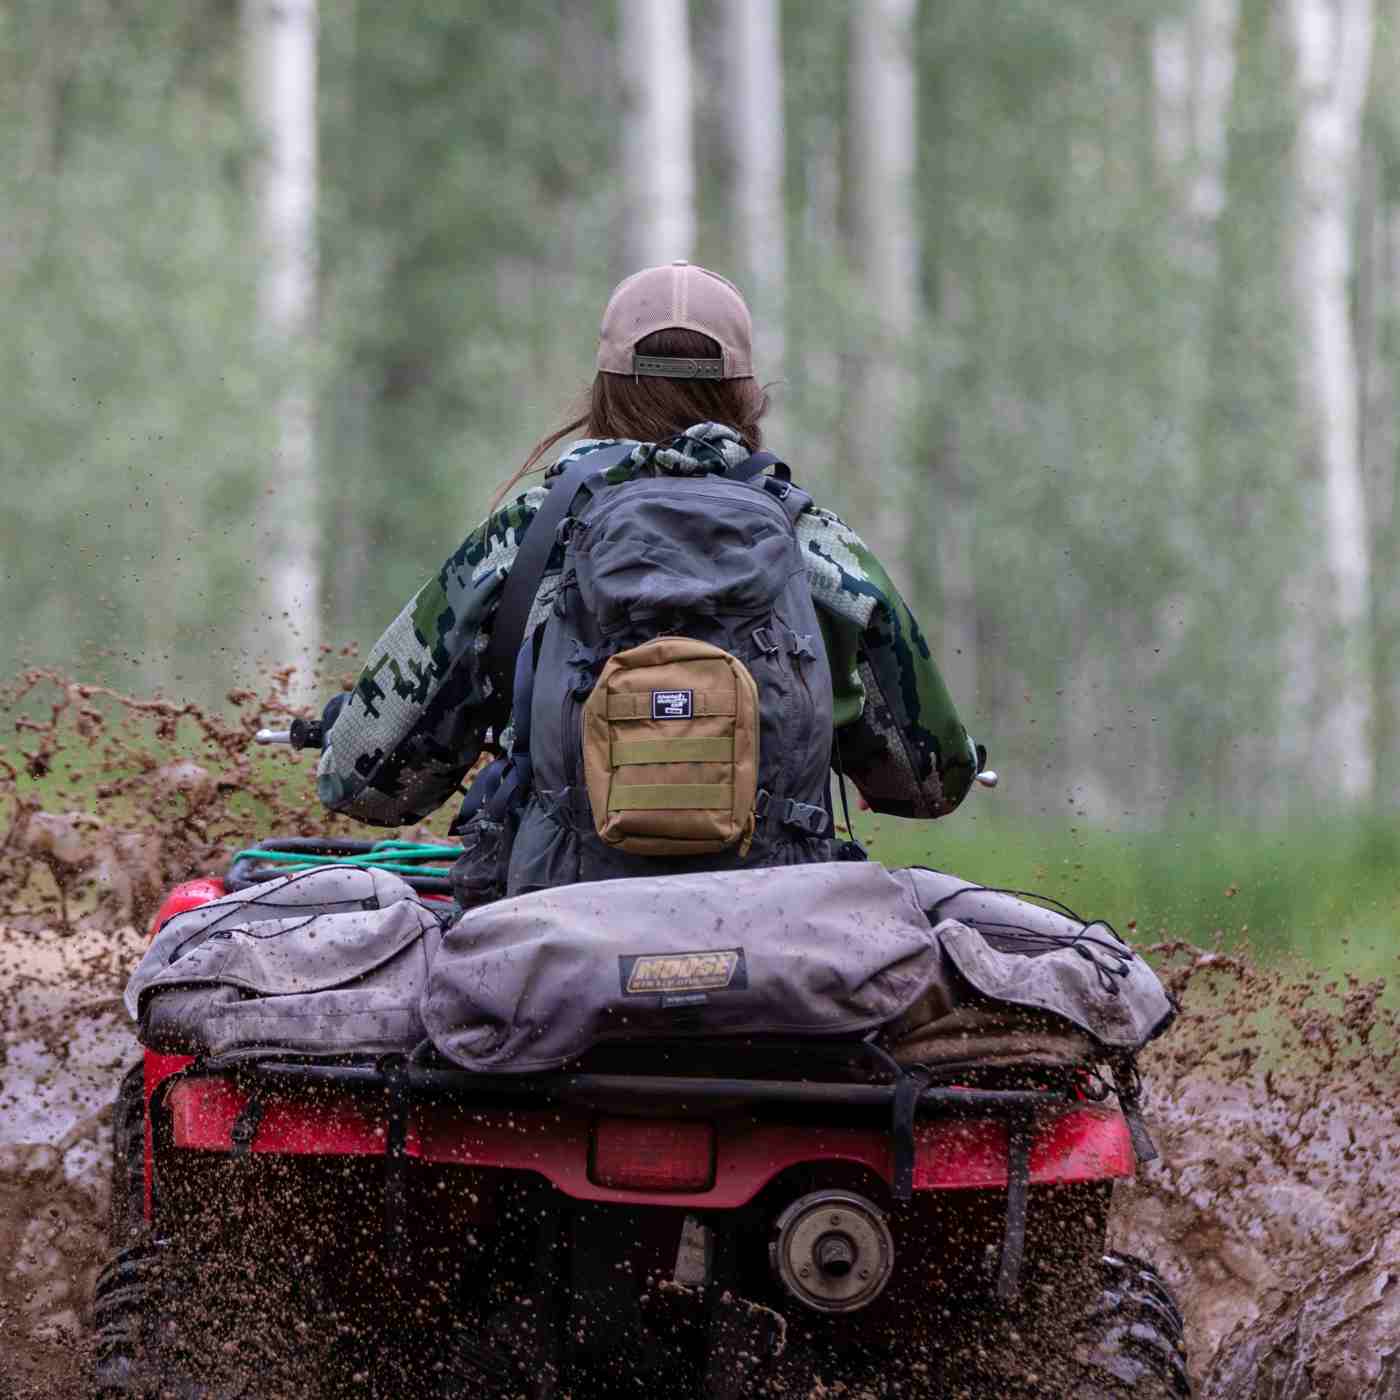 MOLLE Bag Trauma Kit 2.0 - Khaki kit attached to woman's backpack while riding ATV through mud